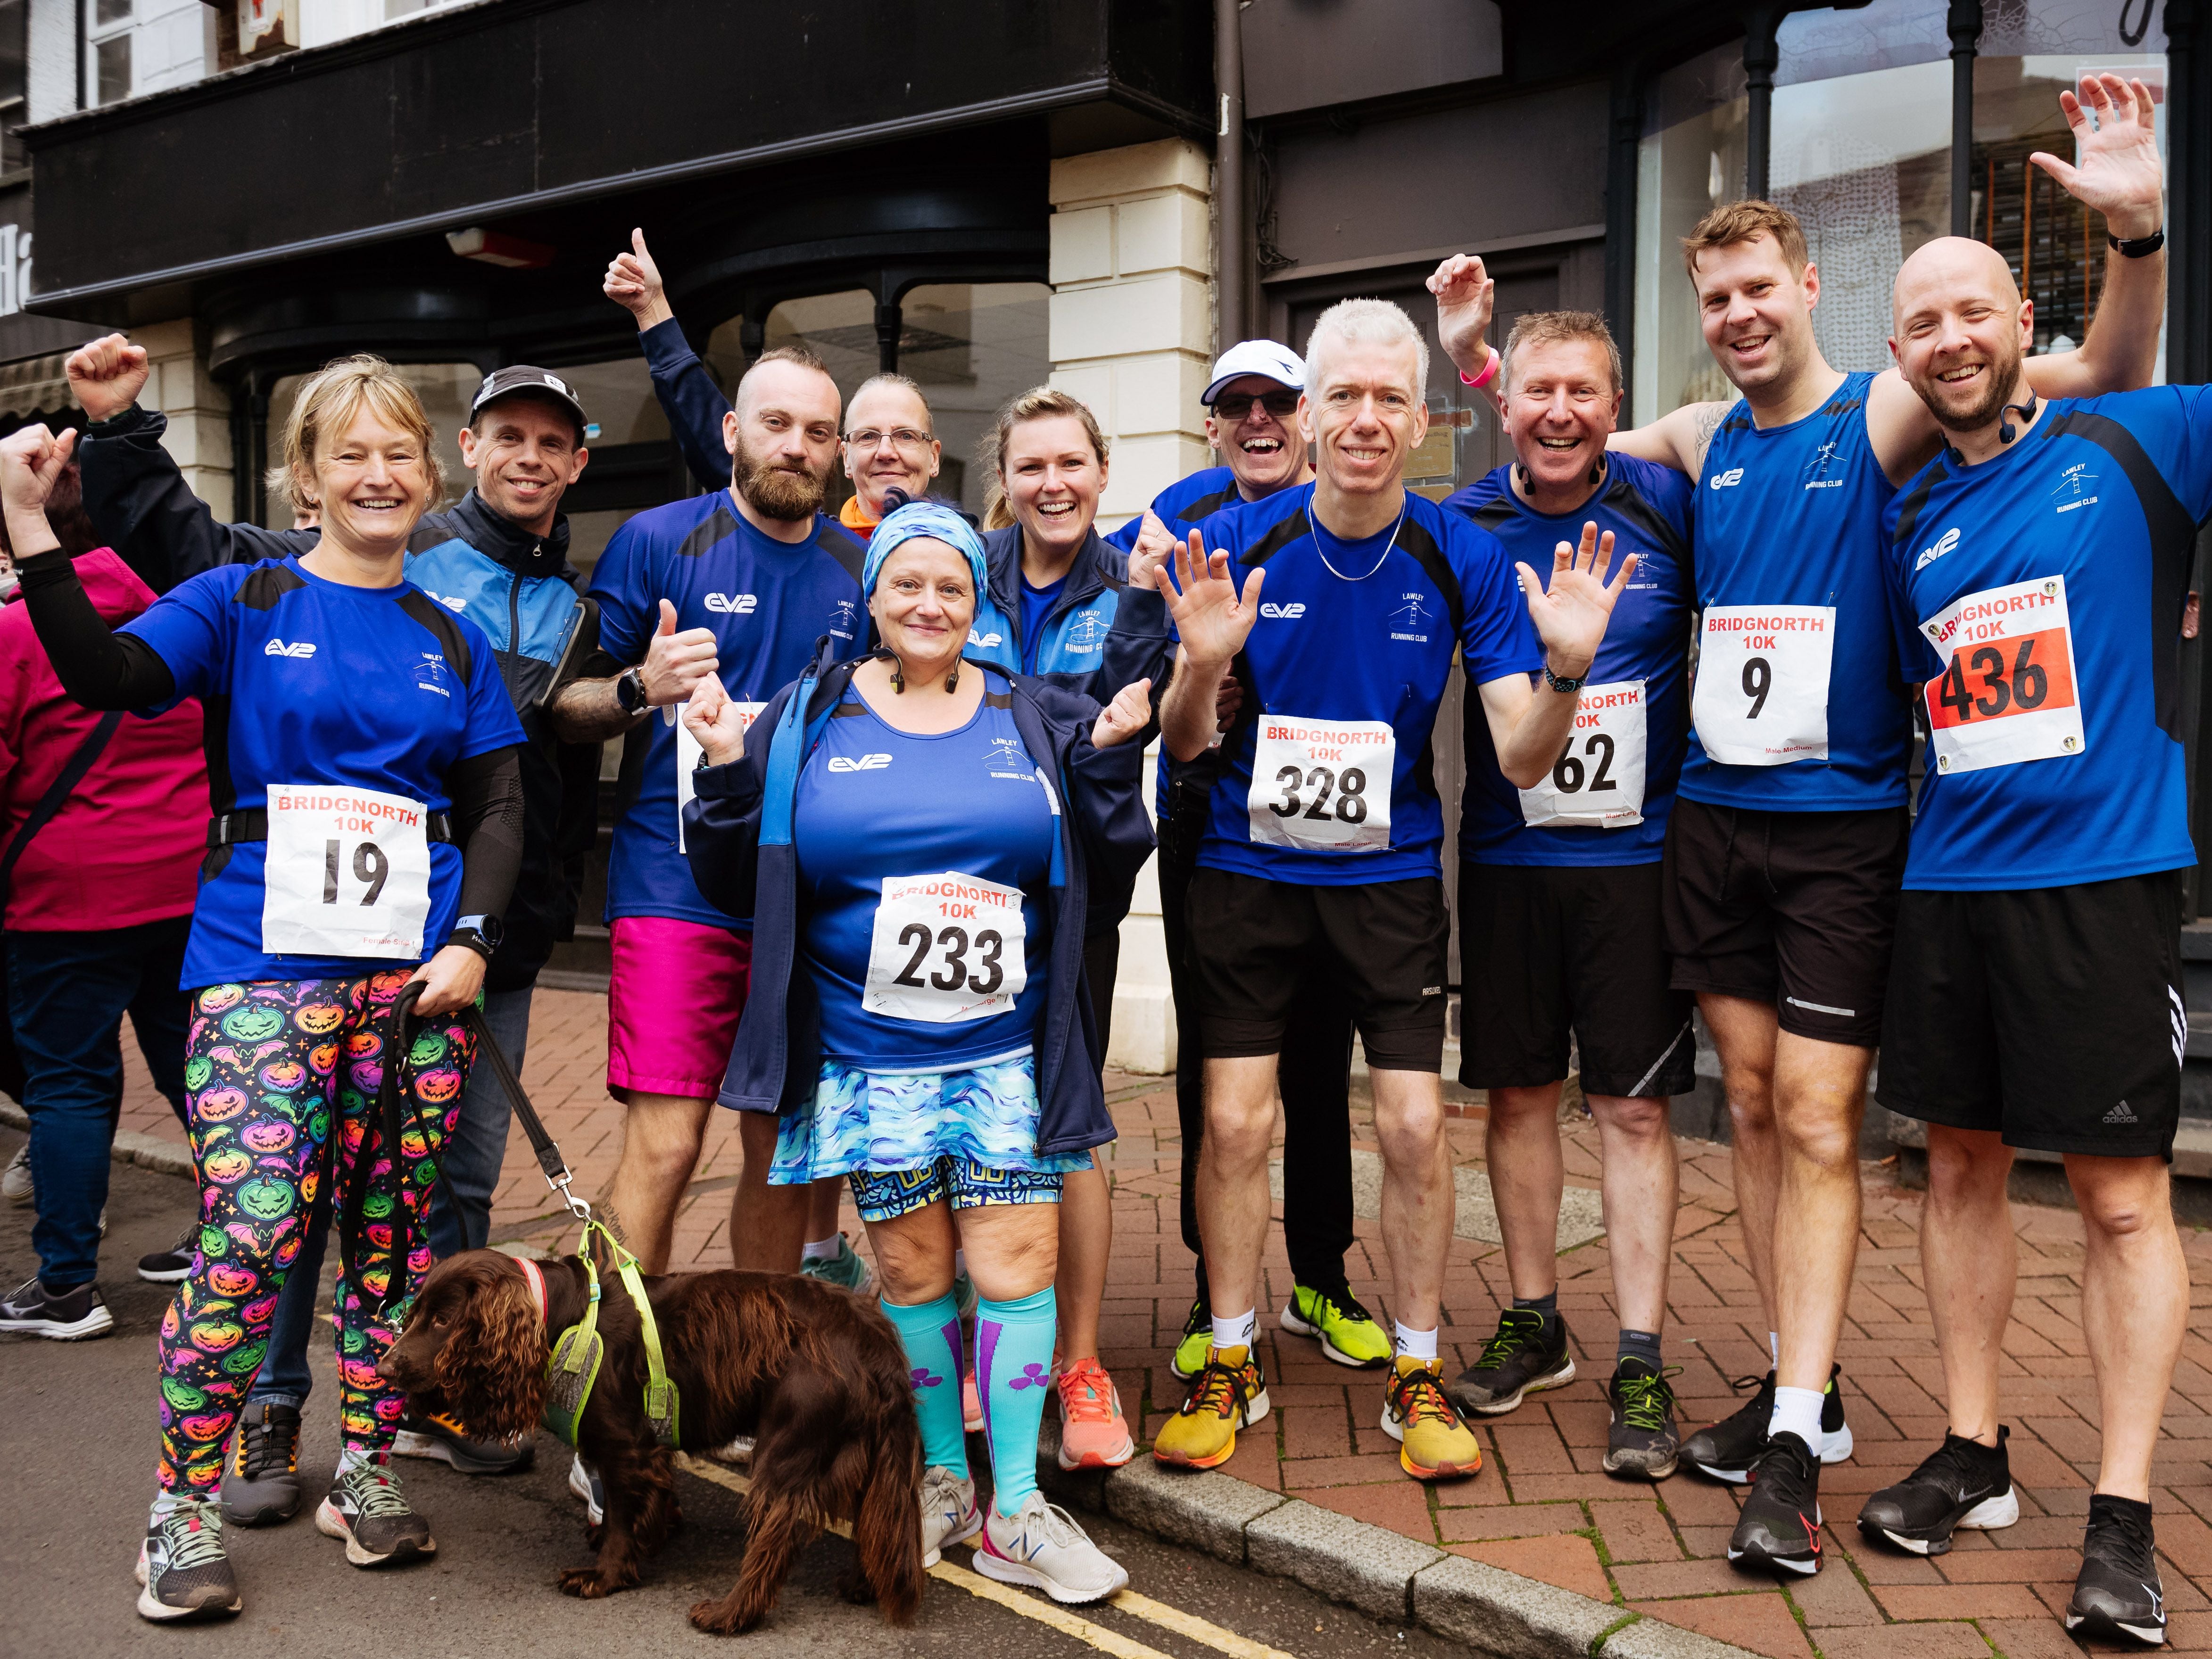 In pictures: Runners return to Bridgnorth as spectators lined streets for much-anticipated 10k